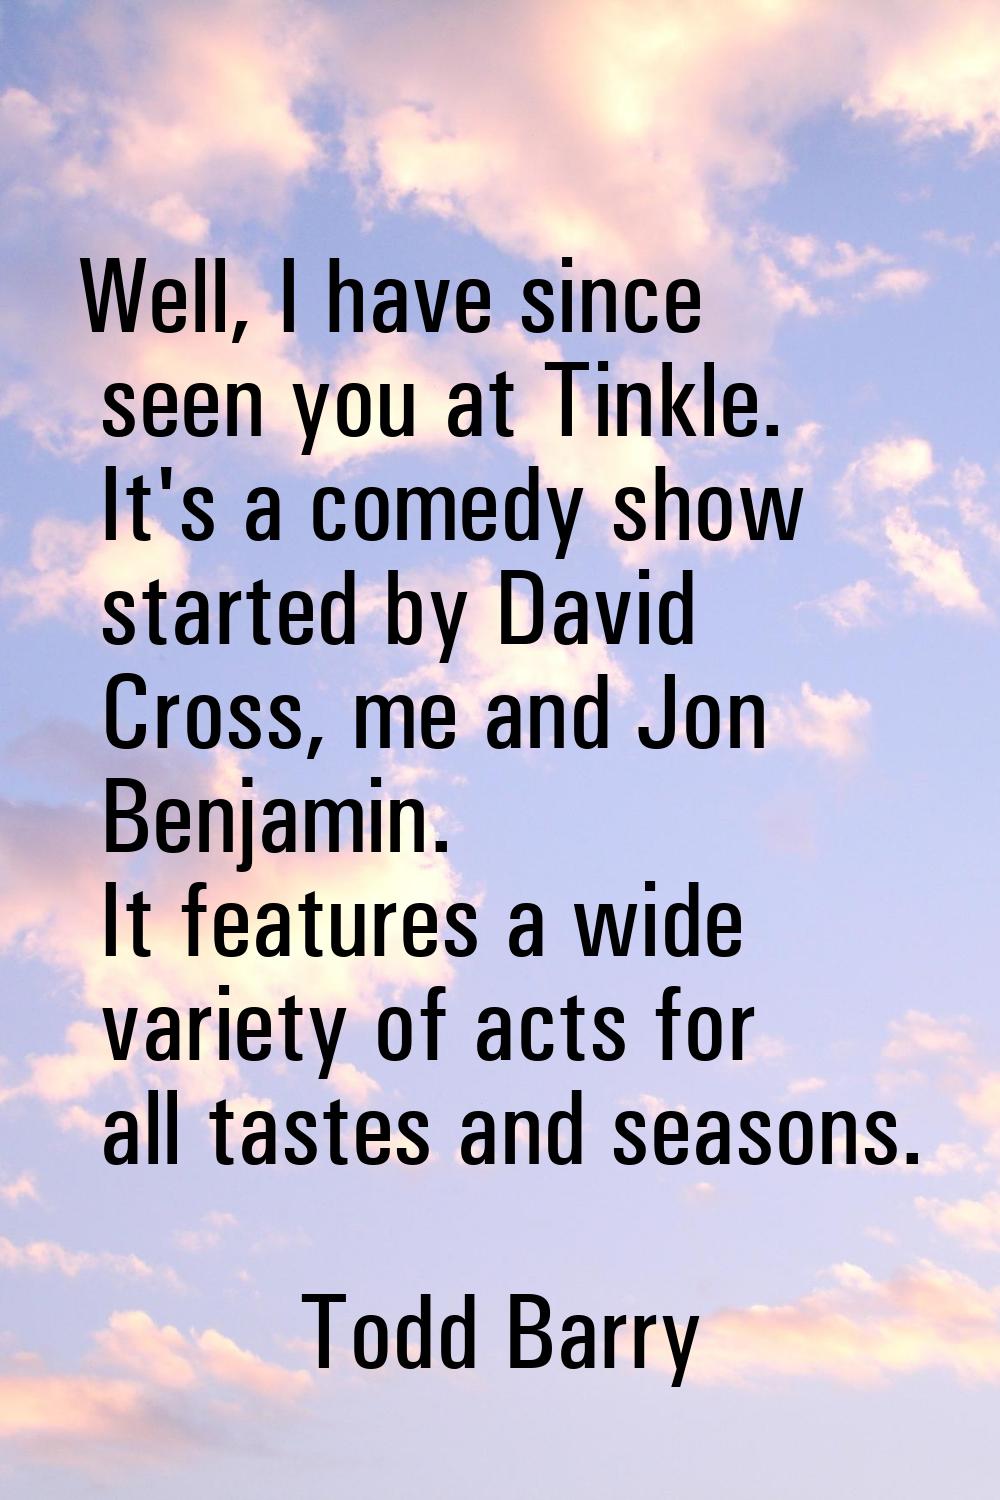 Well, I have since seen you at Tinkle. It's a comedy show started by David Cross, me and Jon Benjam